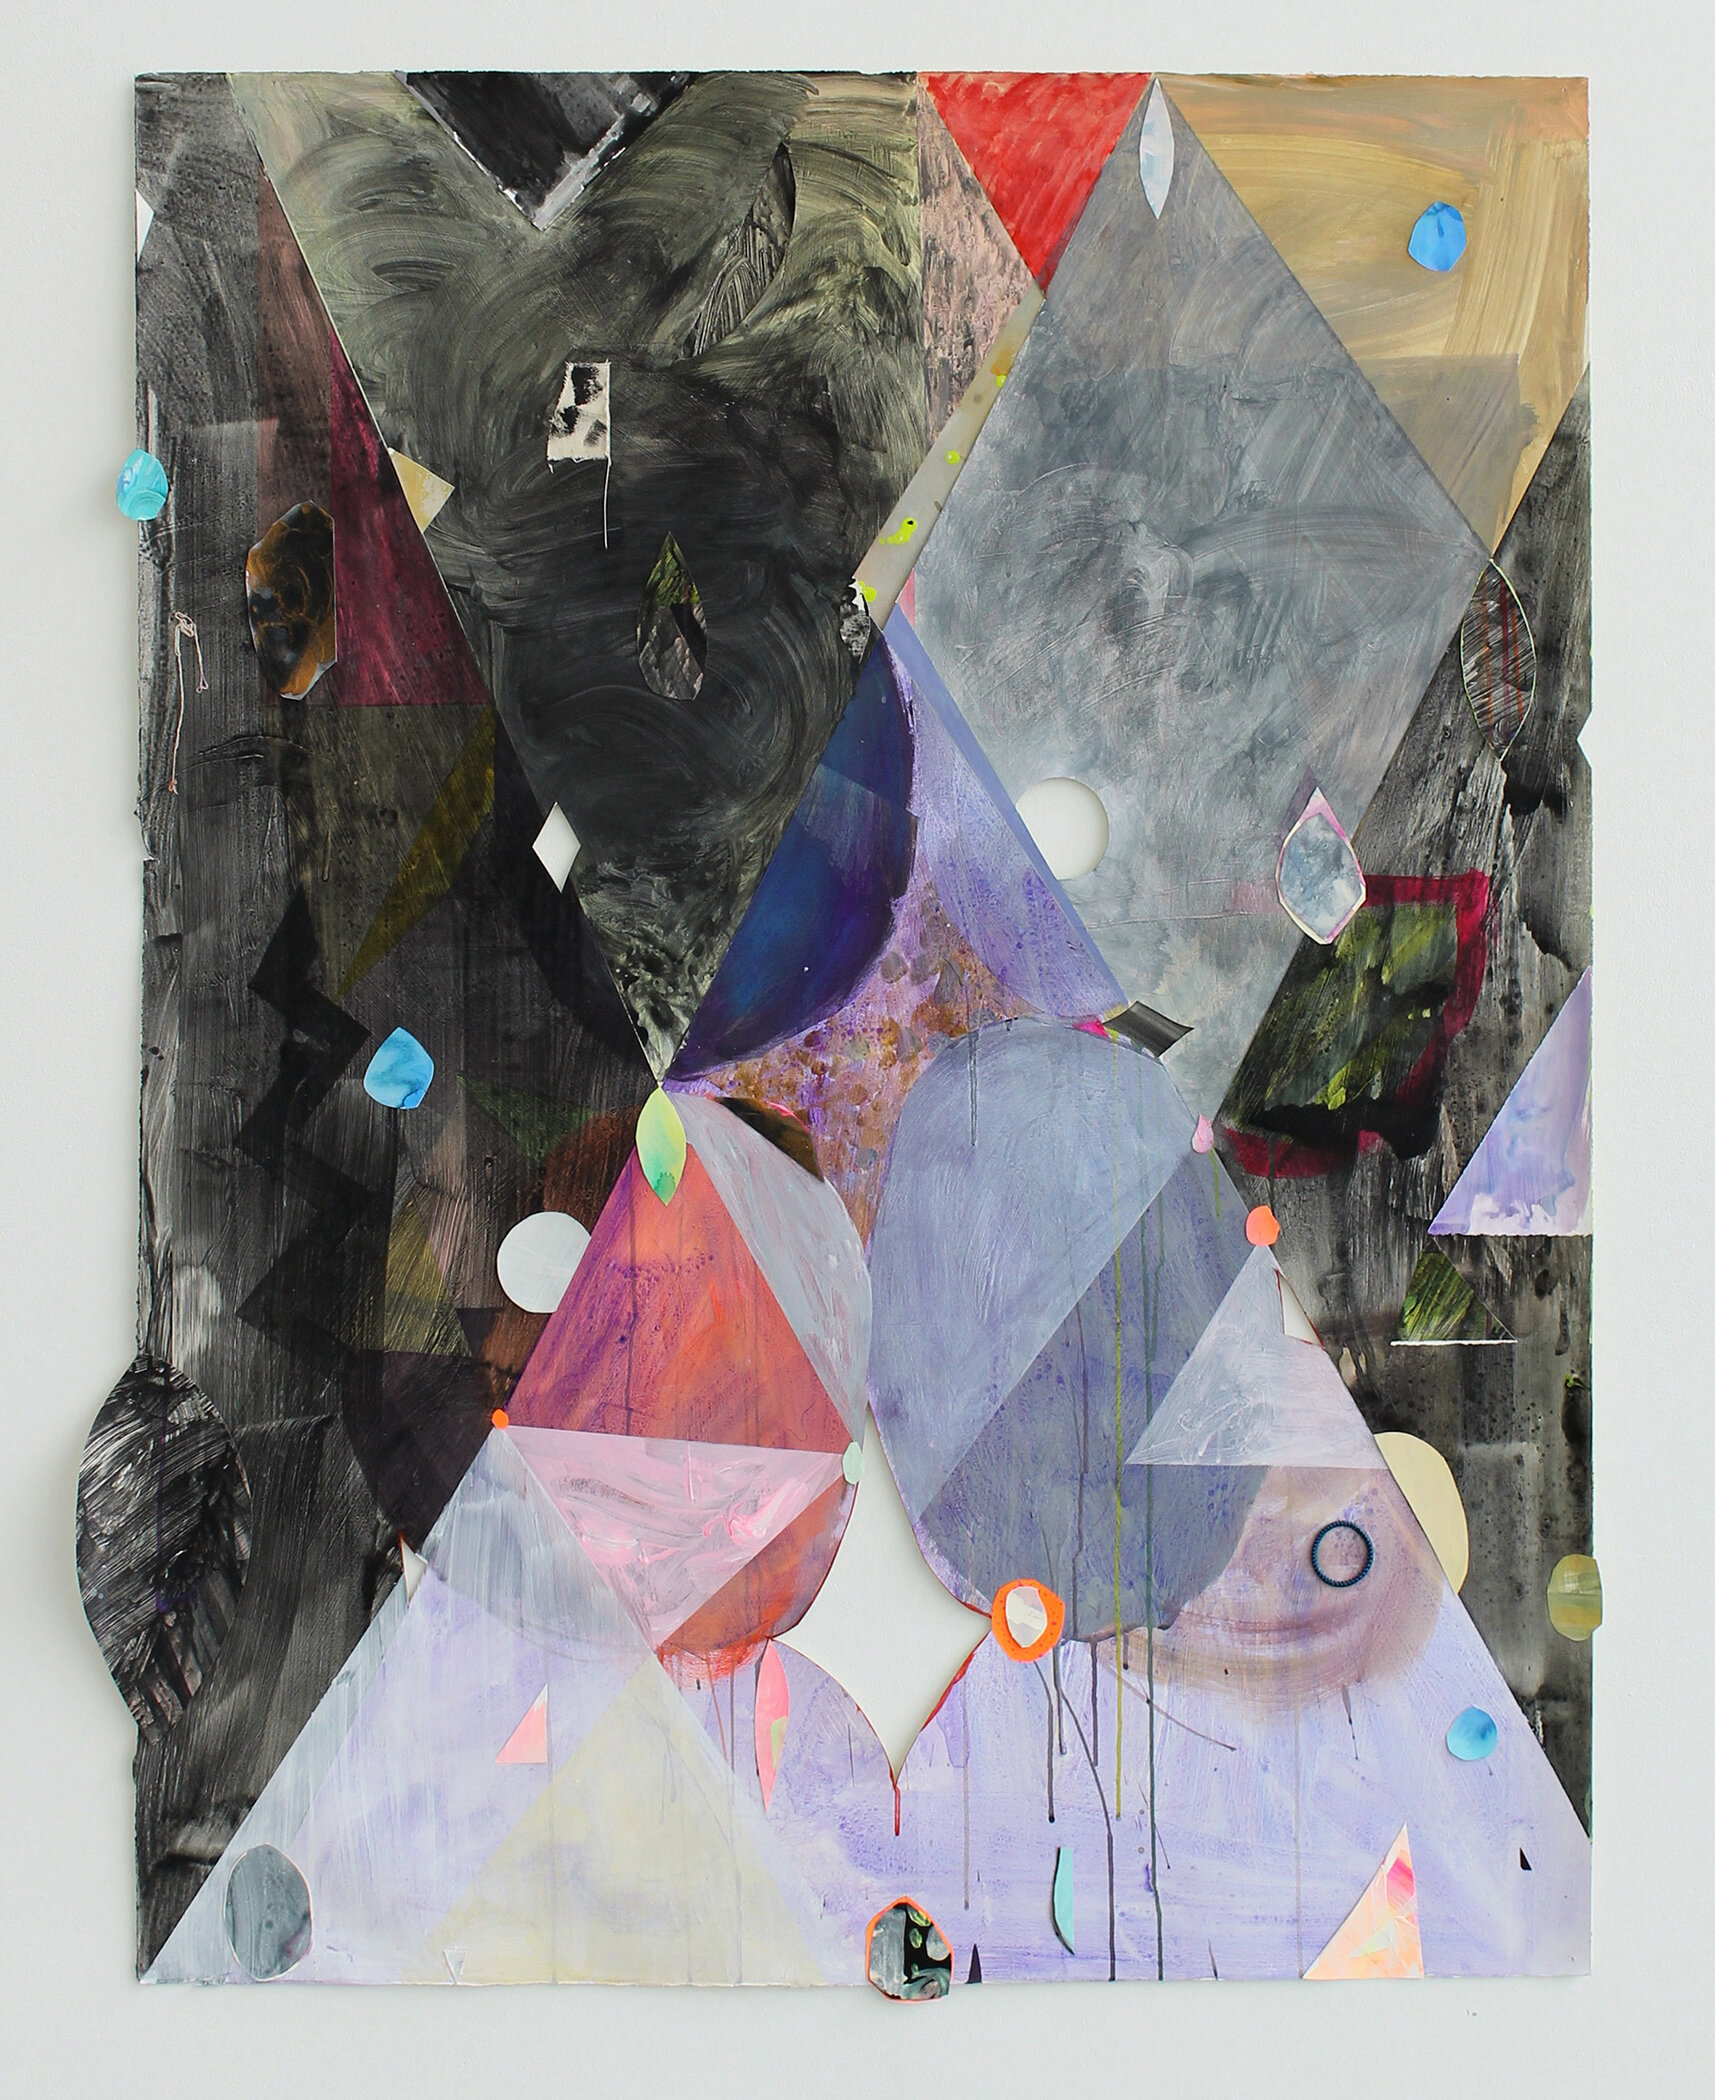   Moon Shapes , 2019 Acrylic, gouache, graphite powder, canvas, rubber band and collage on cut paper 55 1/2 x 44 1/2 inches  